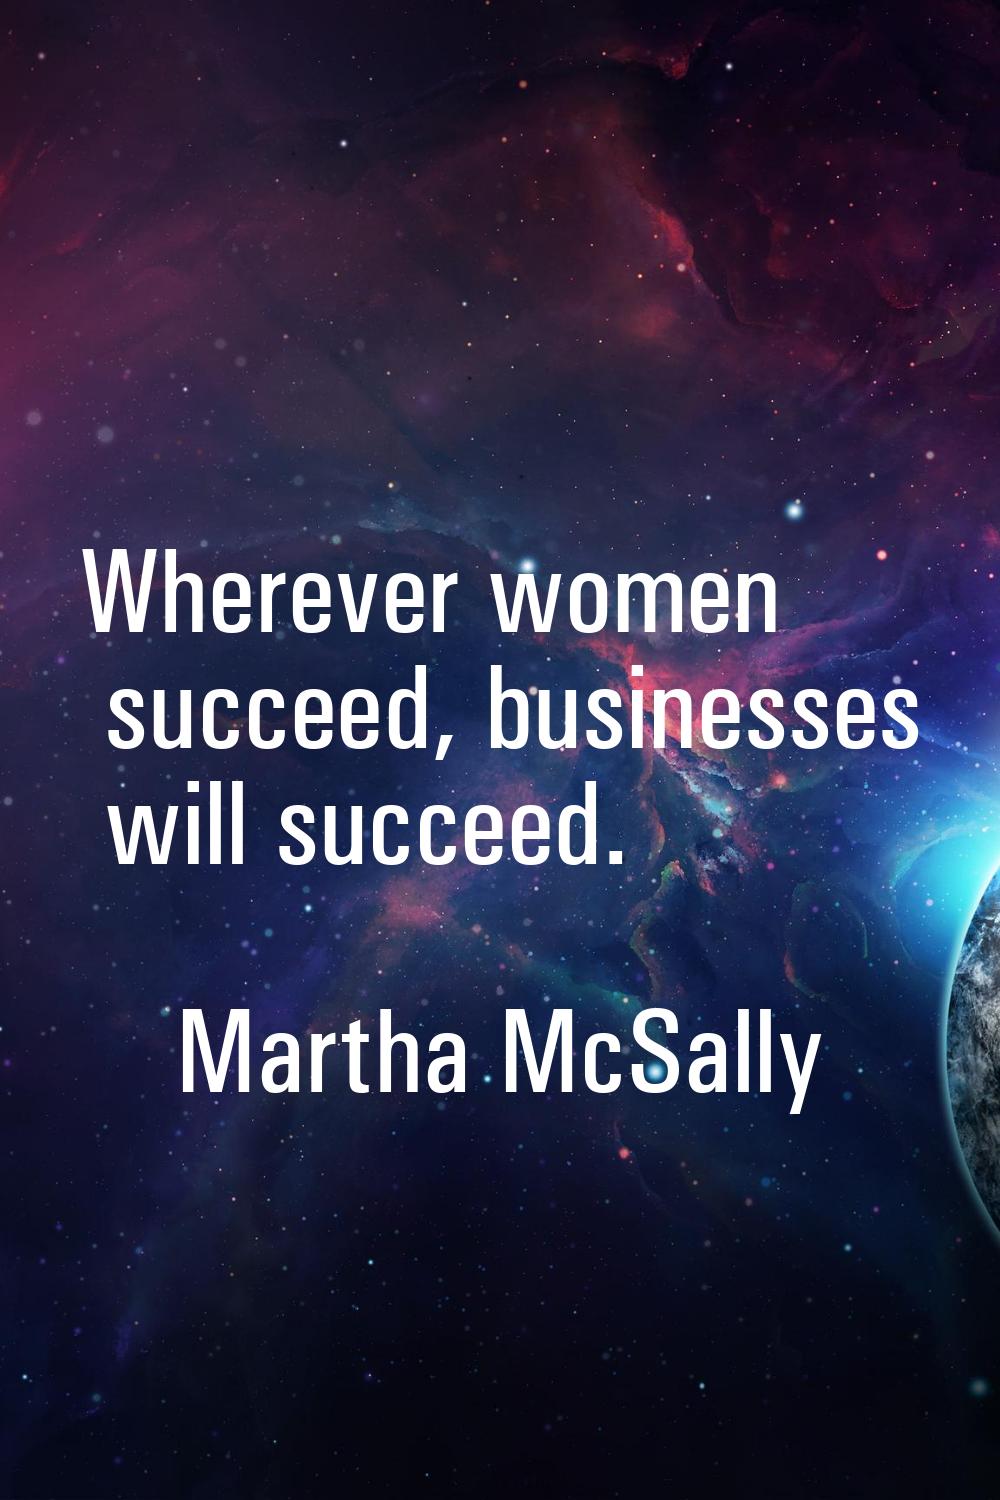 Wherever women succeed, businesses will succeed.